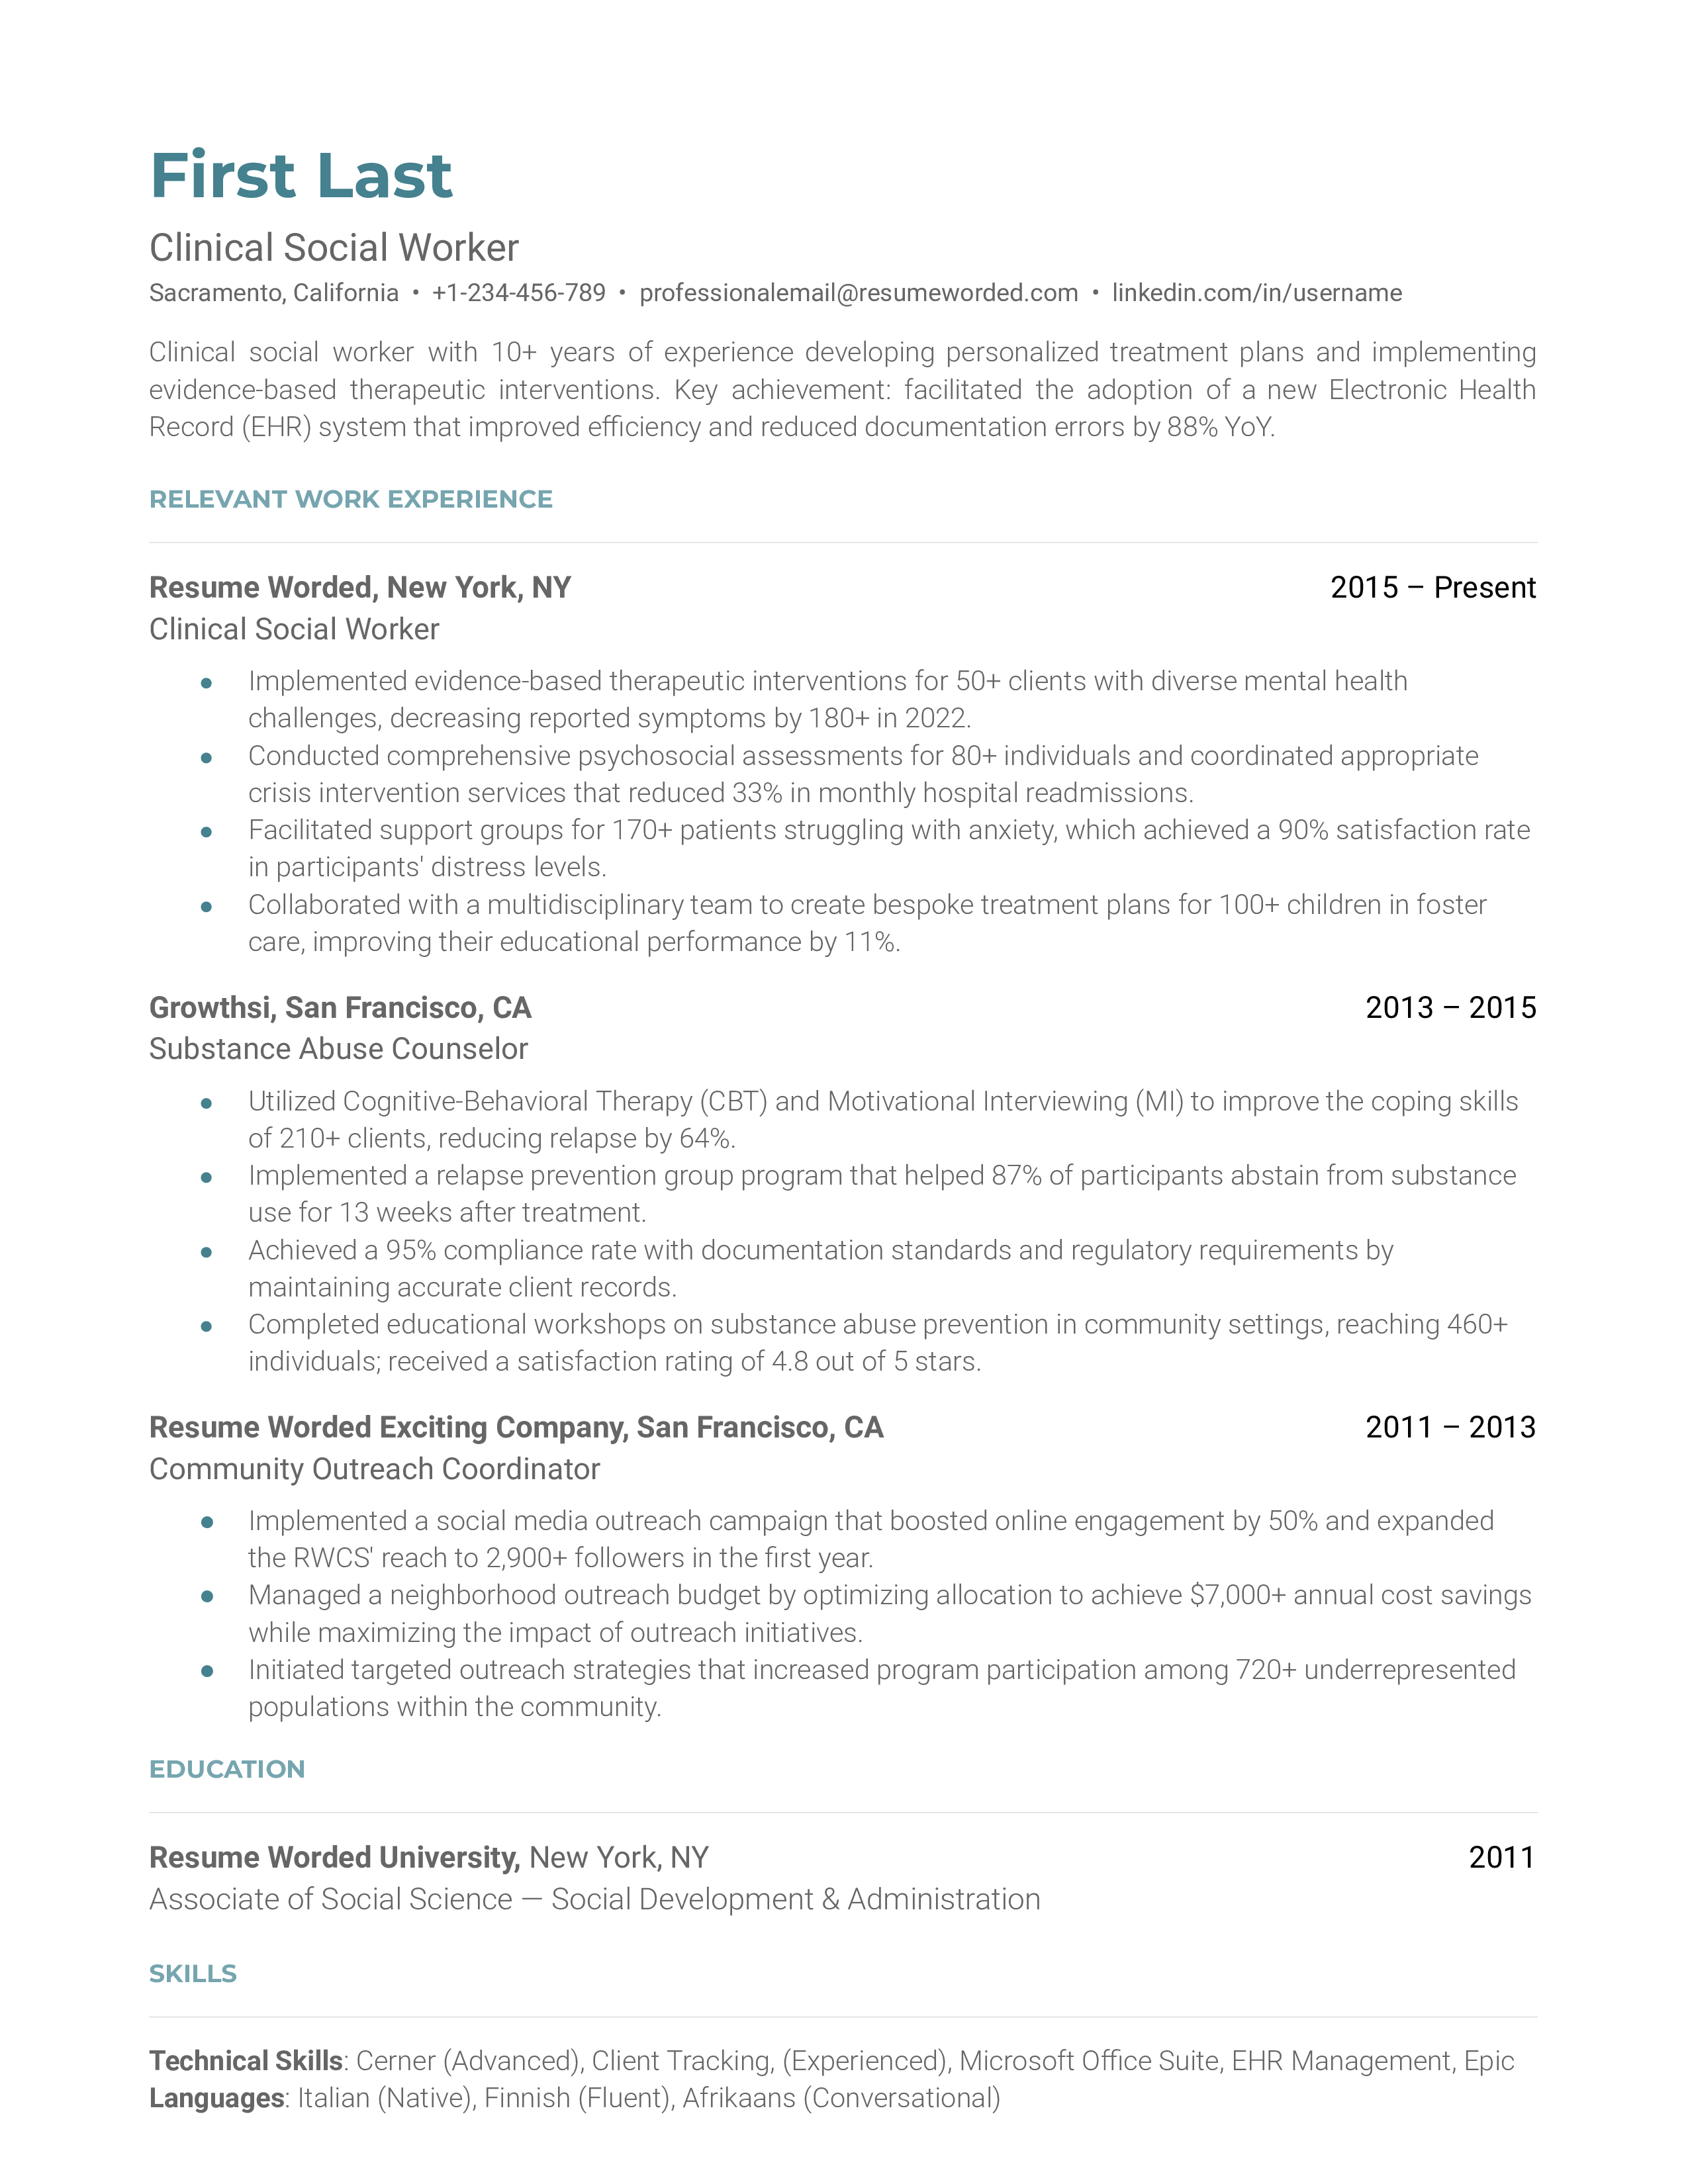 A Clinical Social Worker's CV showcasing professional experience and interdisciplinary collaboration skills.